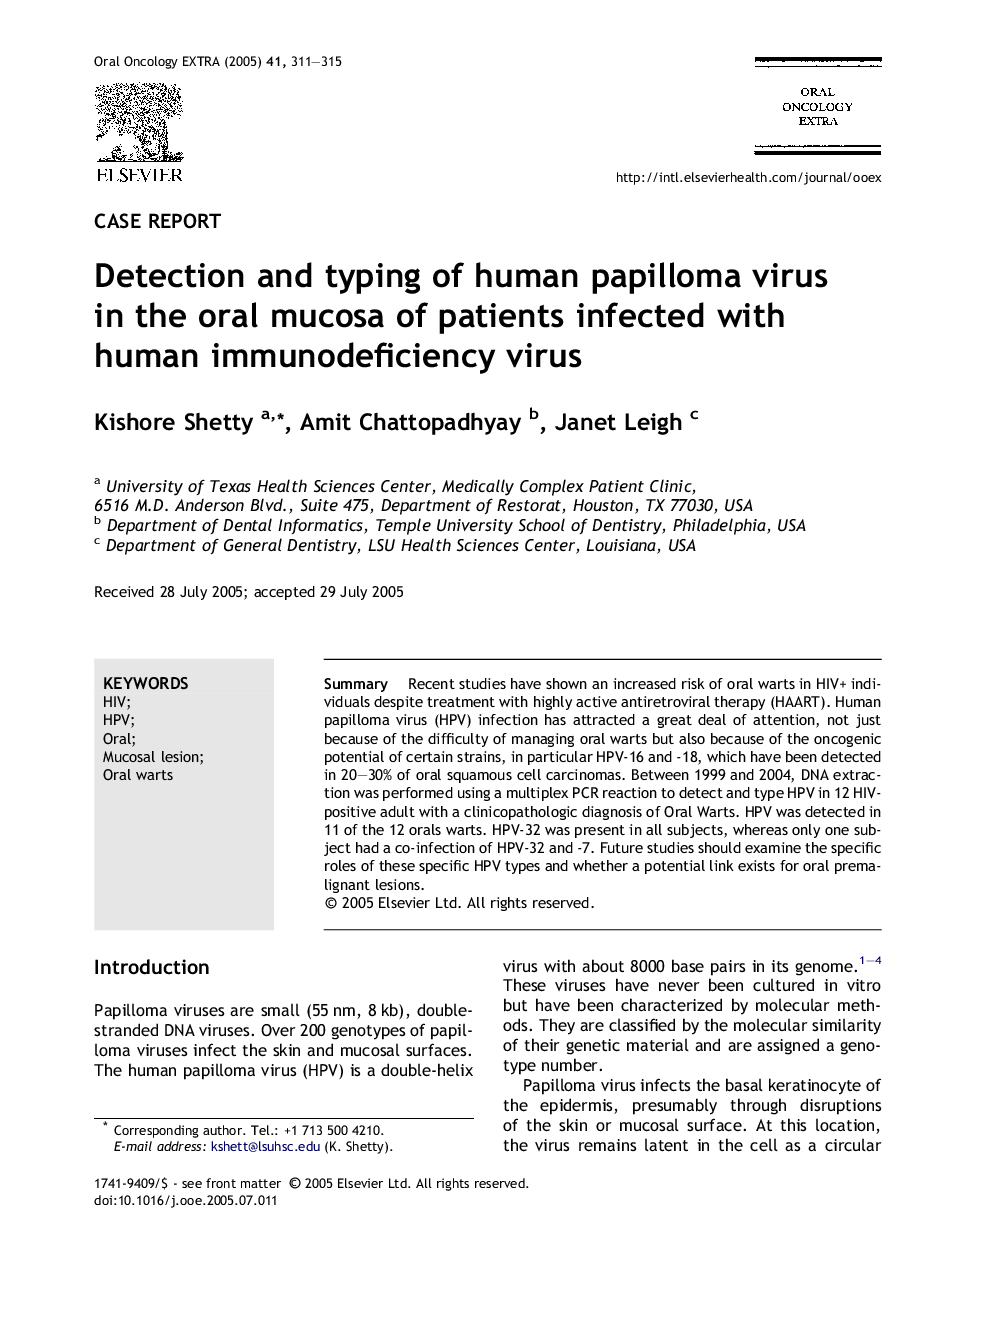 Detection and typing of human papilloma virus in the oral mucosa of patients infected with human immunodeficiency virus